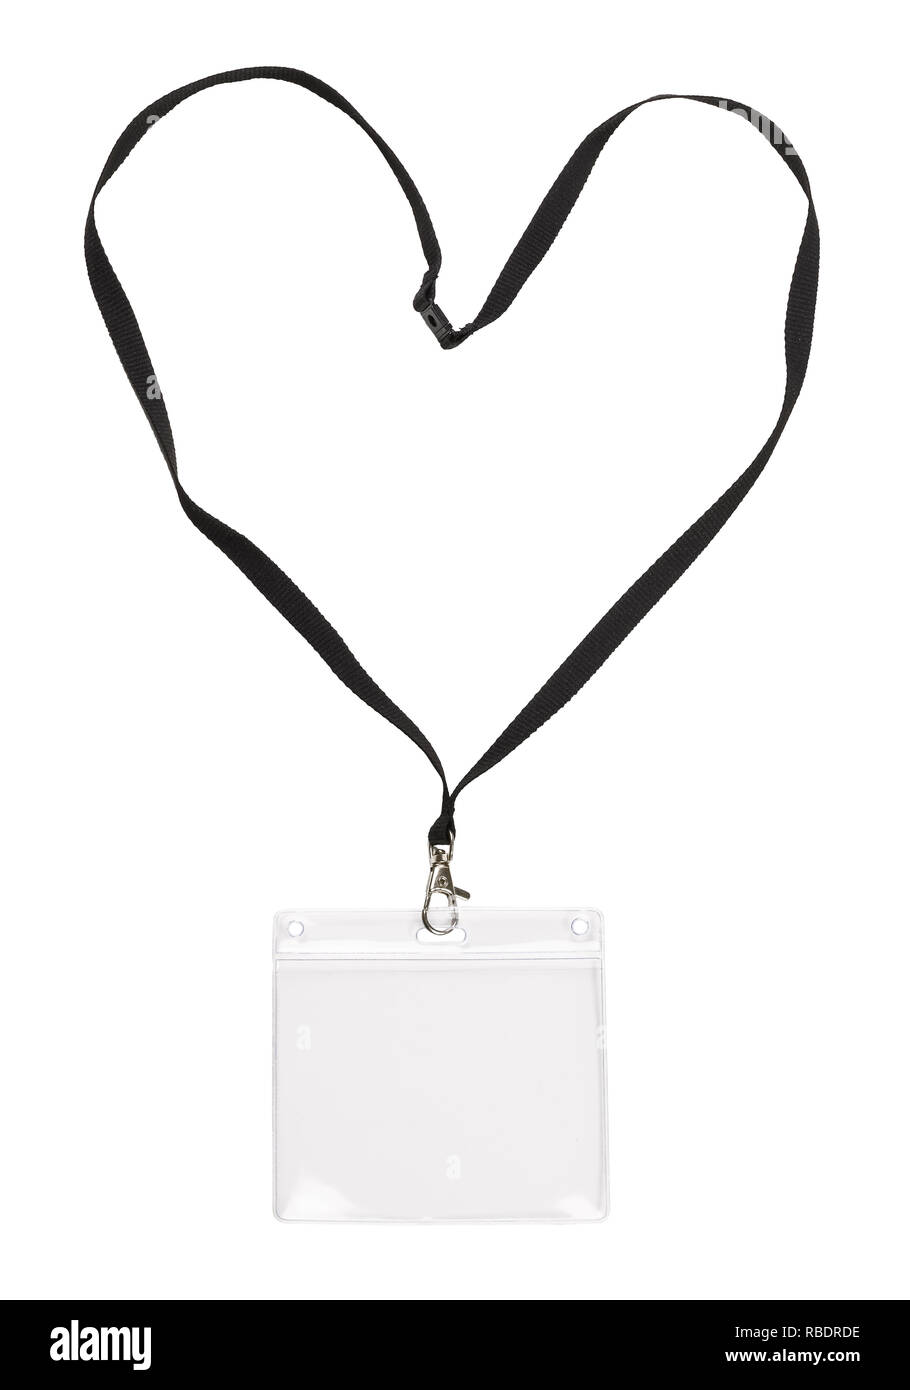 Name badge and lanyard in a heart shape Stock Photo